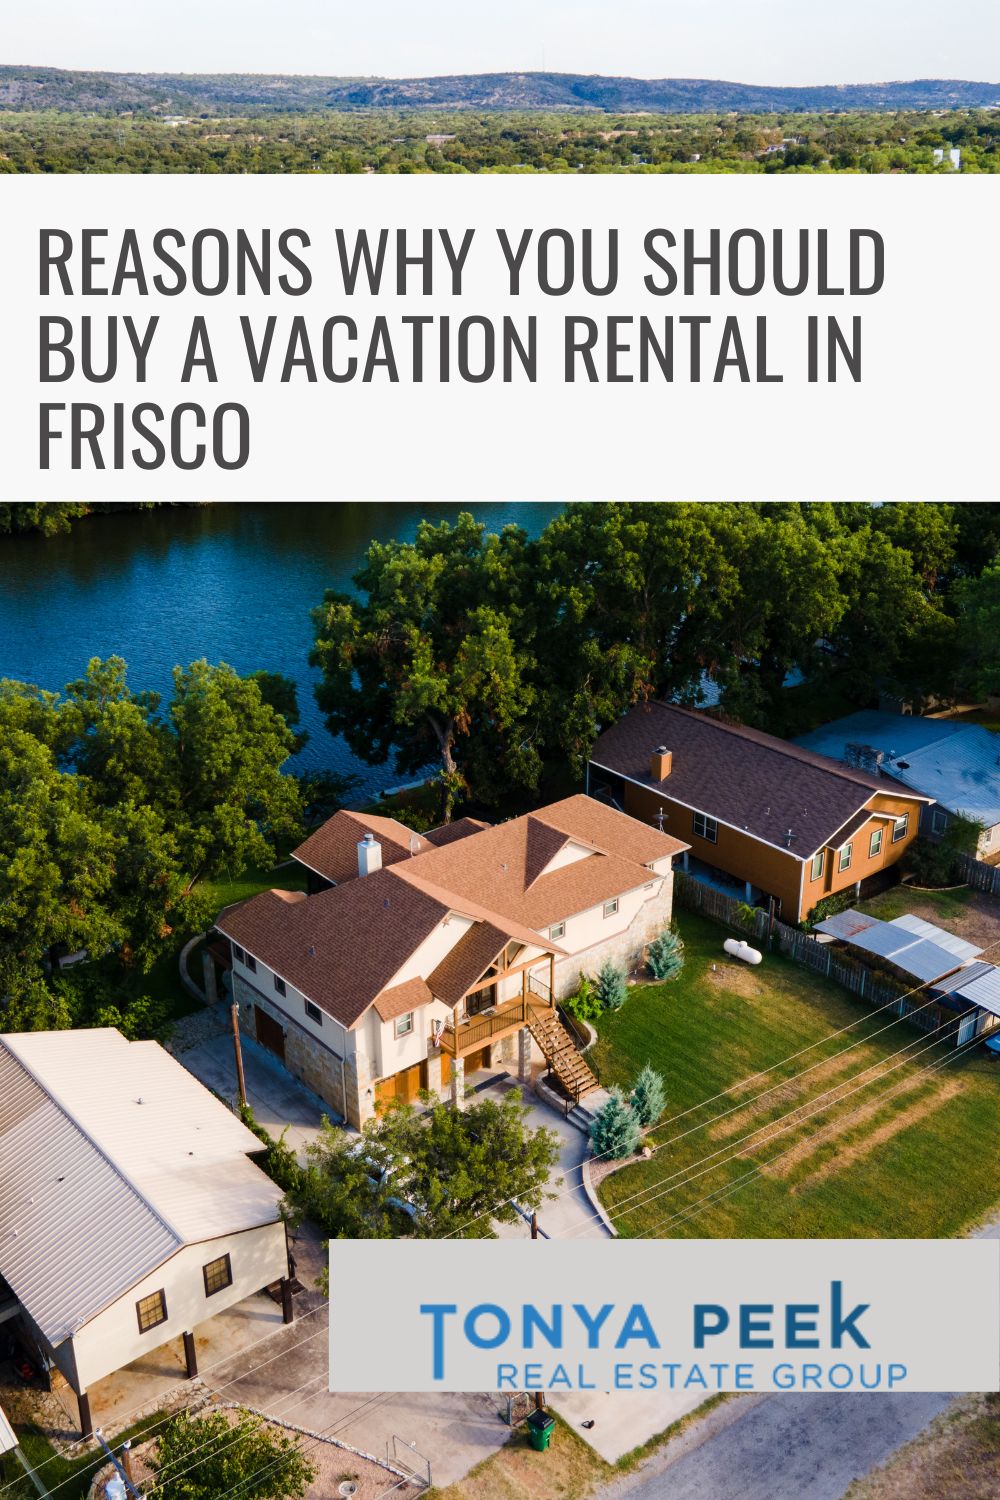 Reasons Why You should Buy A Vacation Rental In Frisco